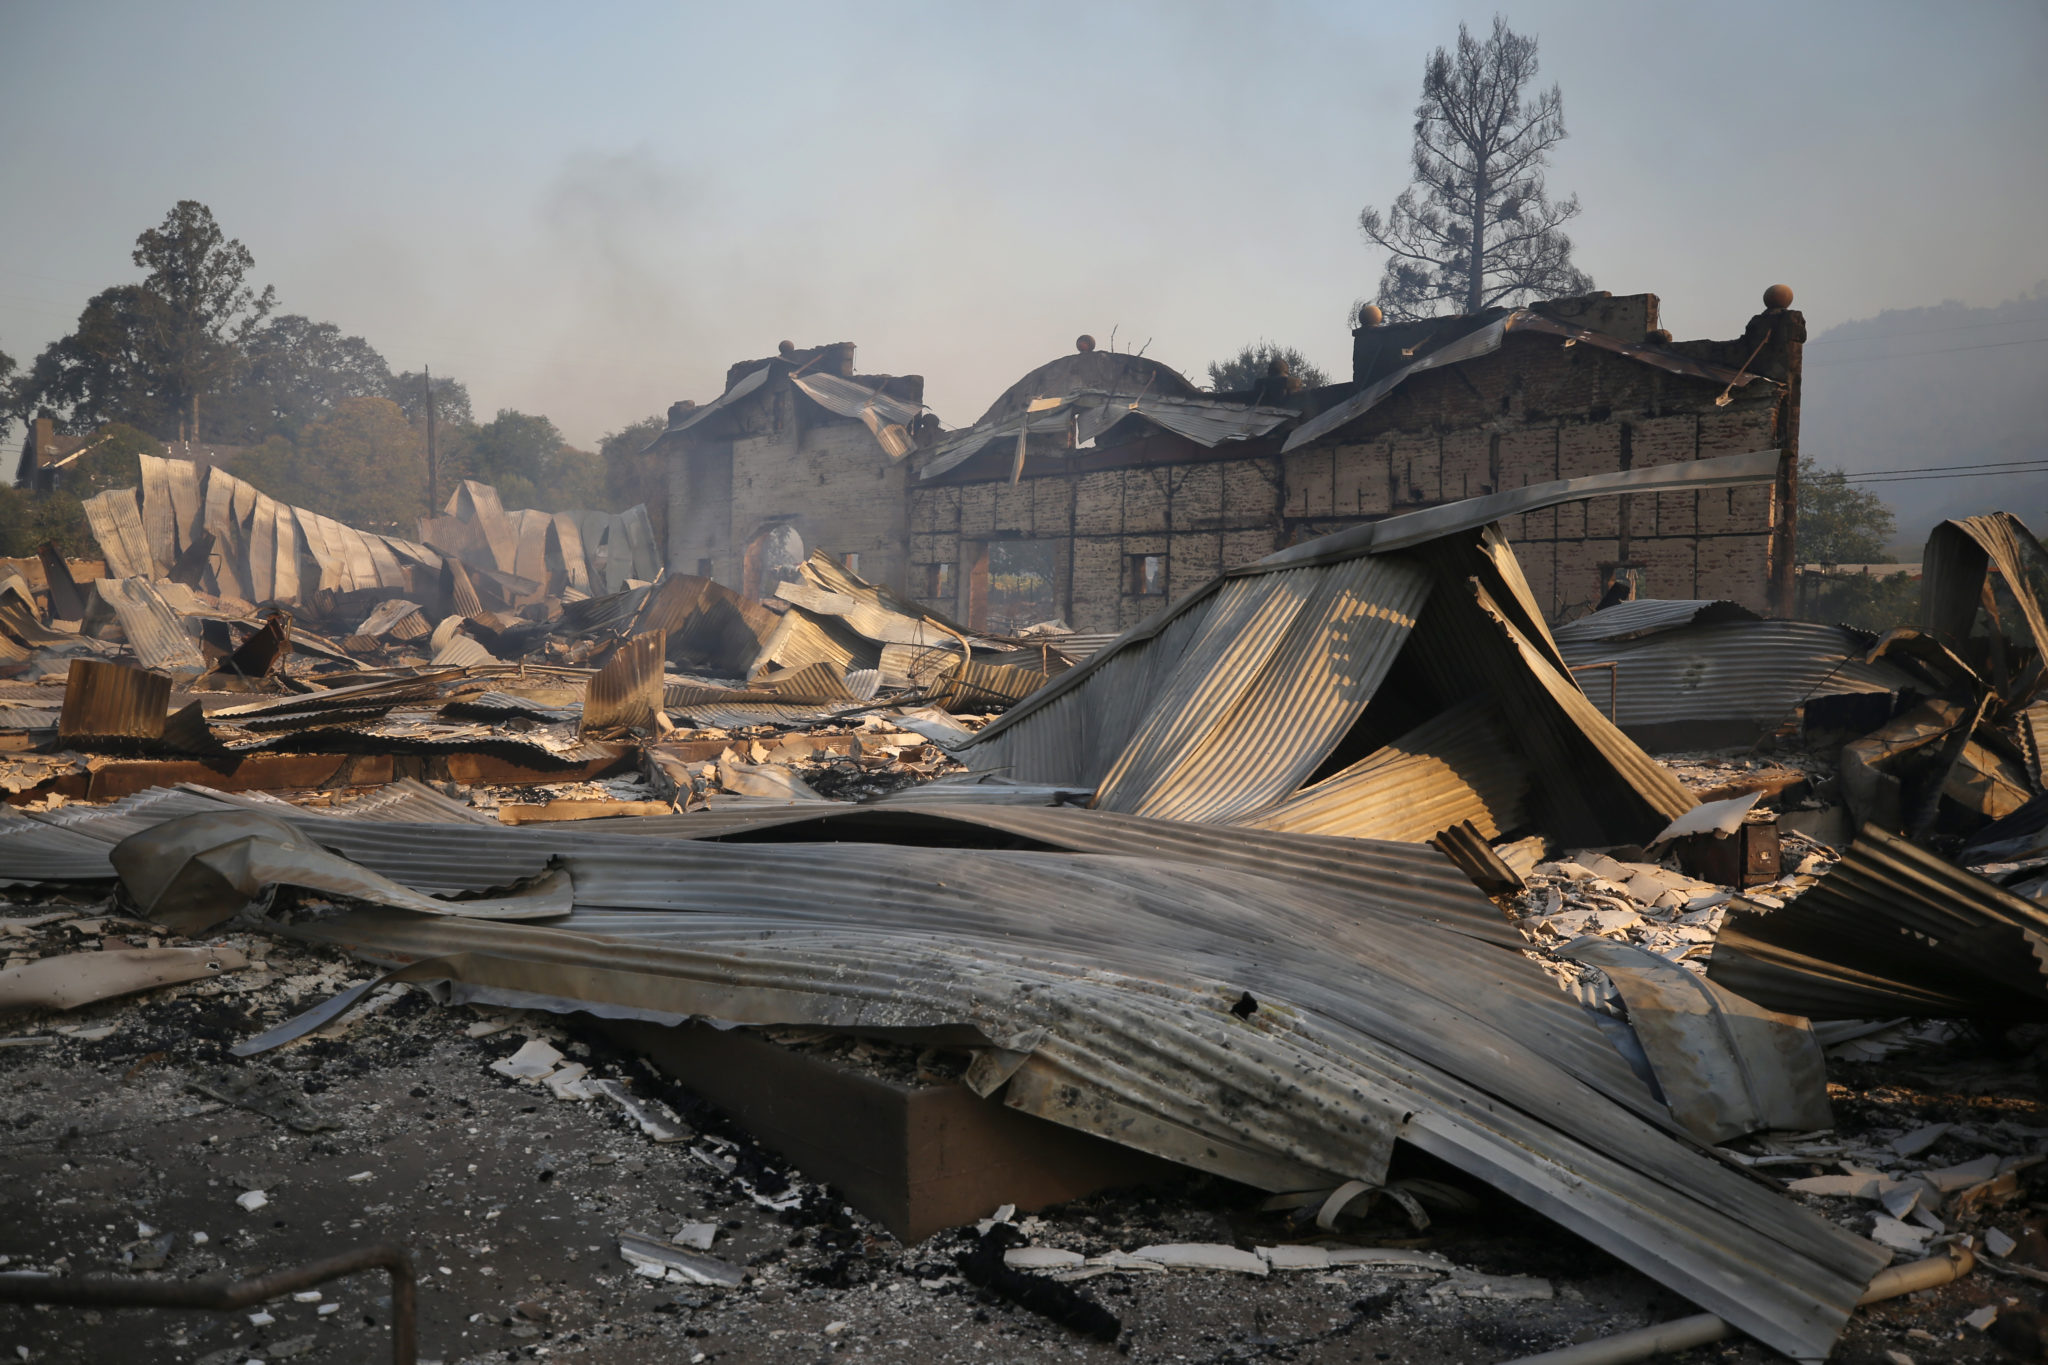 The charred debris of Soda Rock Winery after it burned in the Kincade fire in Healdsburg on Sunday, October 27, 2019. (Beth Schlanker / The Press Democrat)